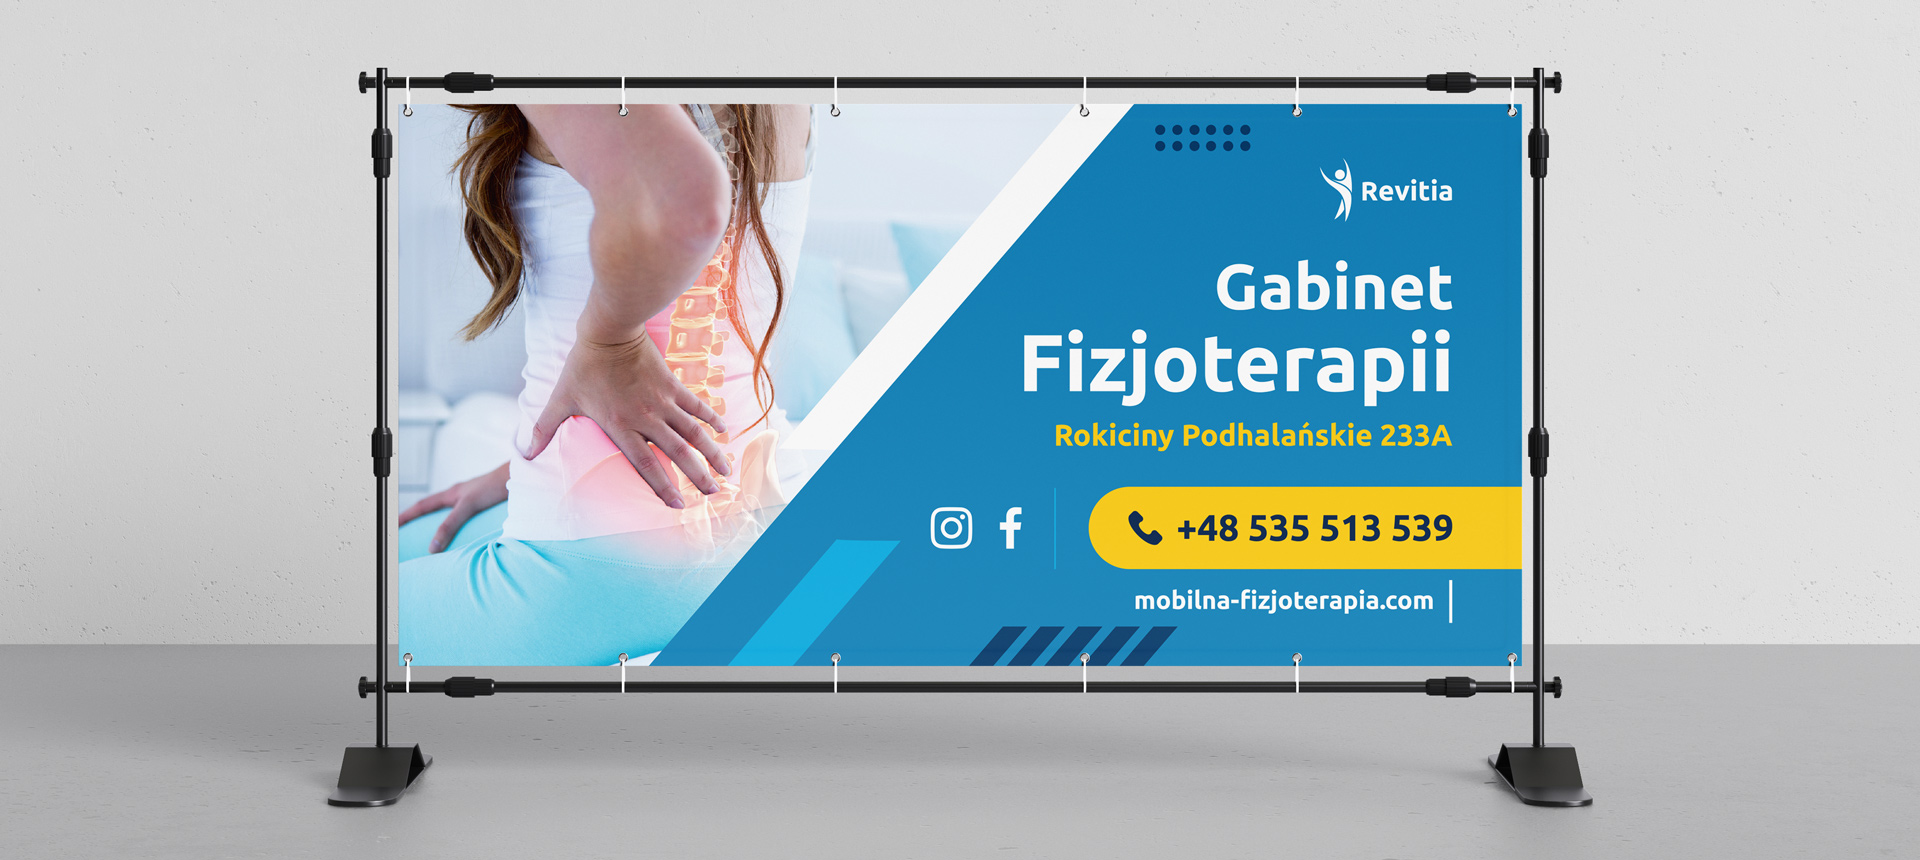 Revitia Physiotherapiepraxis - Banner